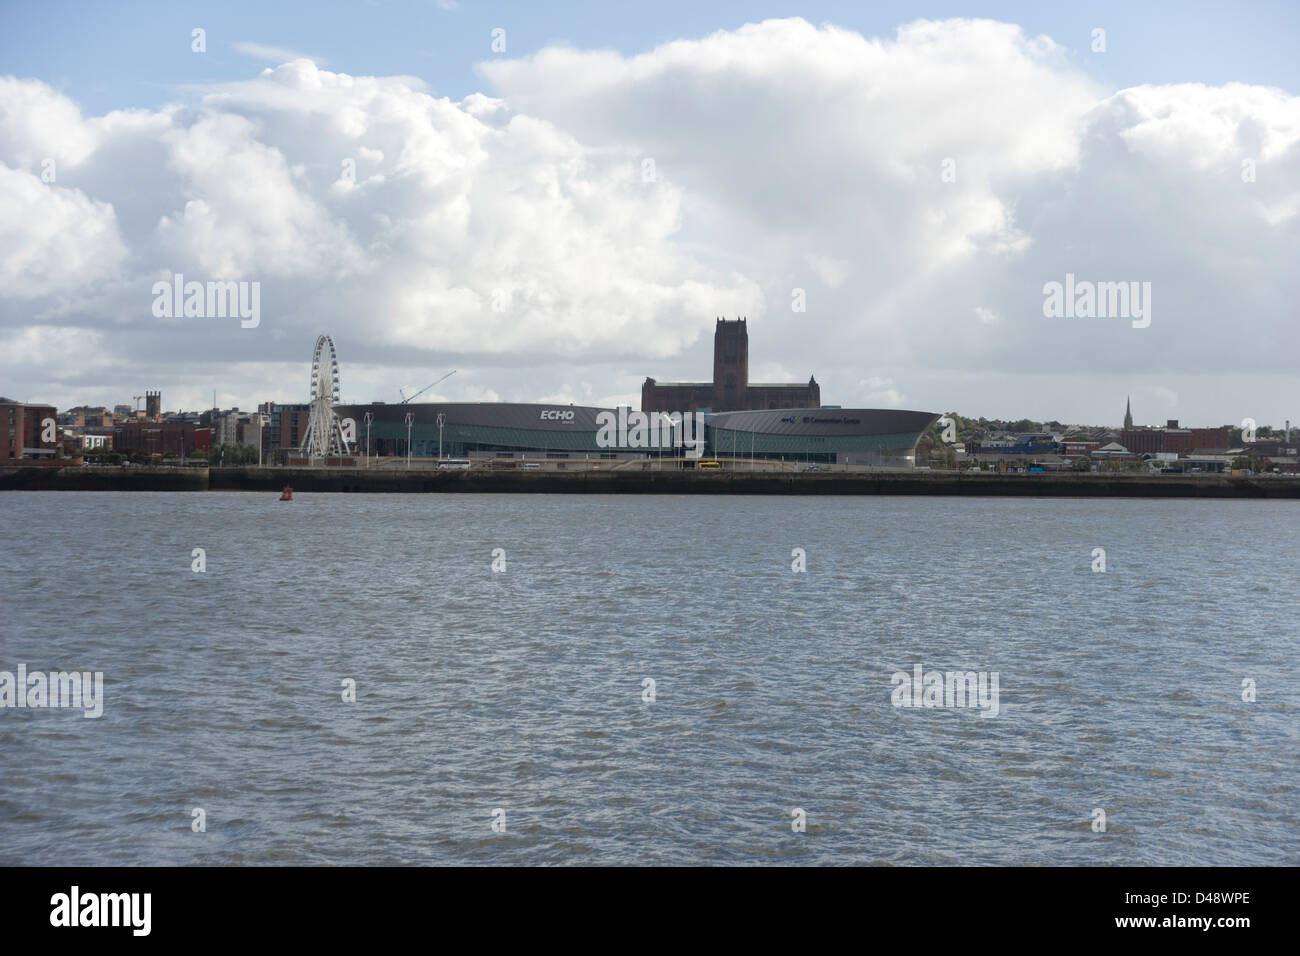 Liverpool Echo Arena, BT Convention Centre and the Anglican cathedral in Liverpool and Mersey River from the Mersey Ferry Stock Photo